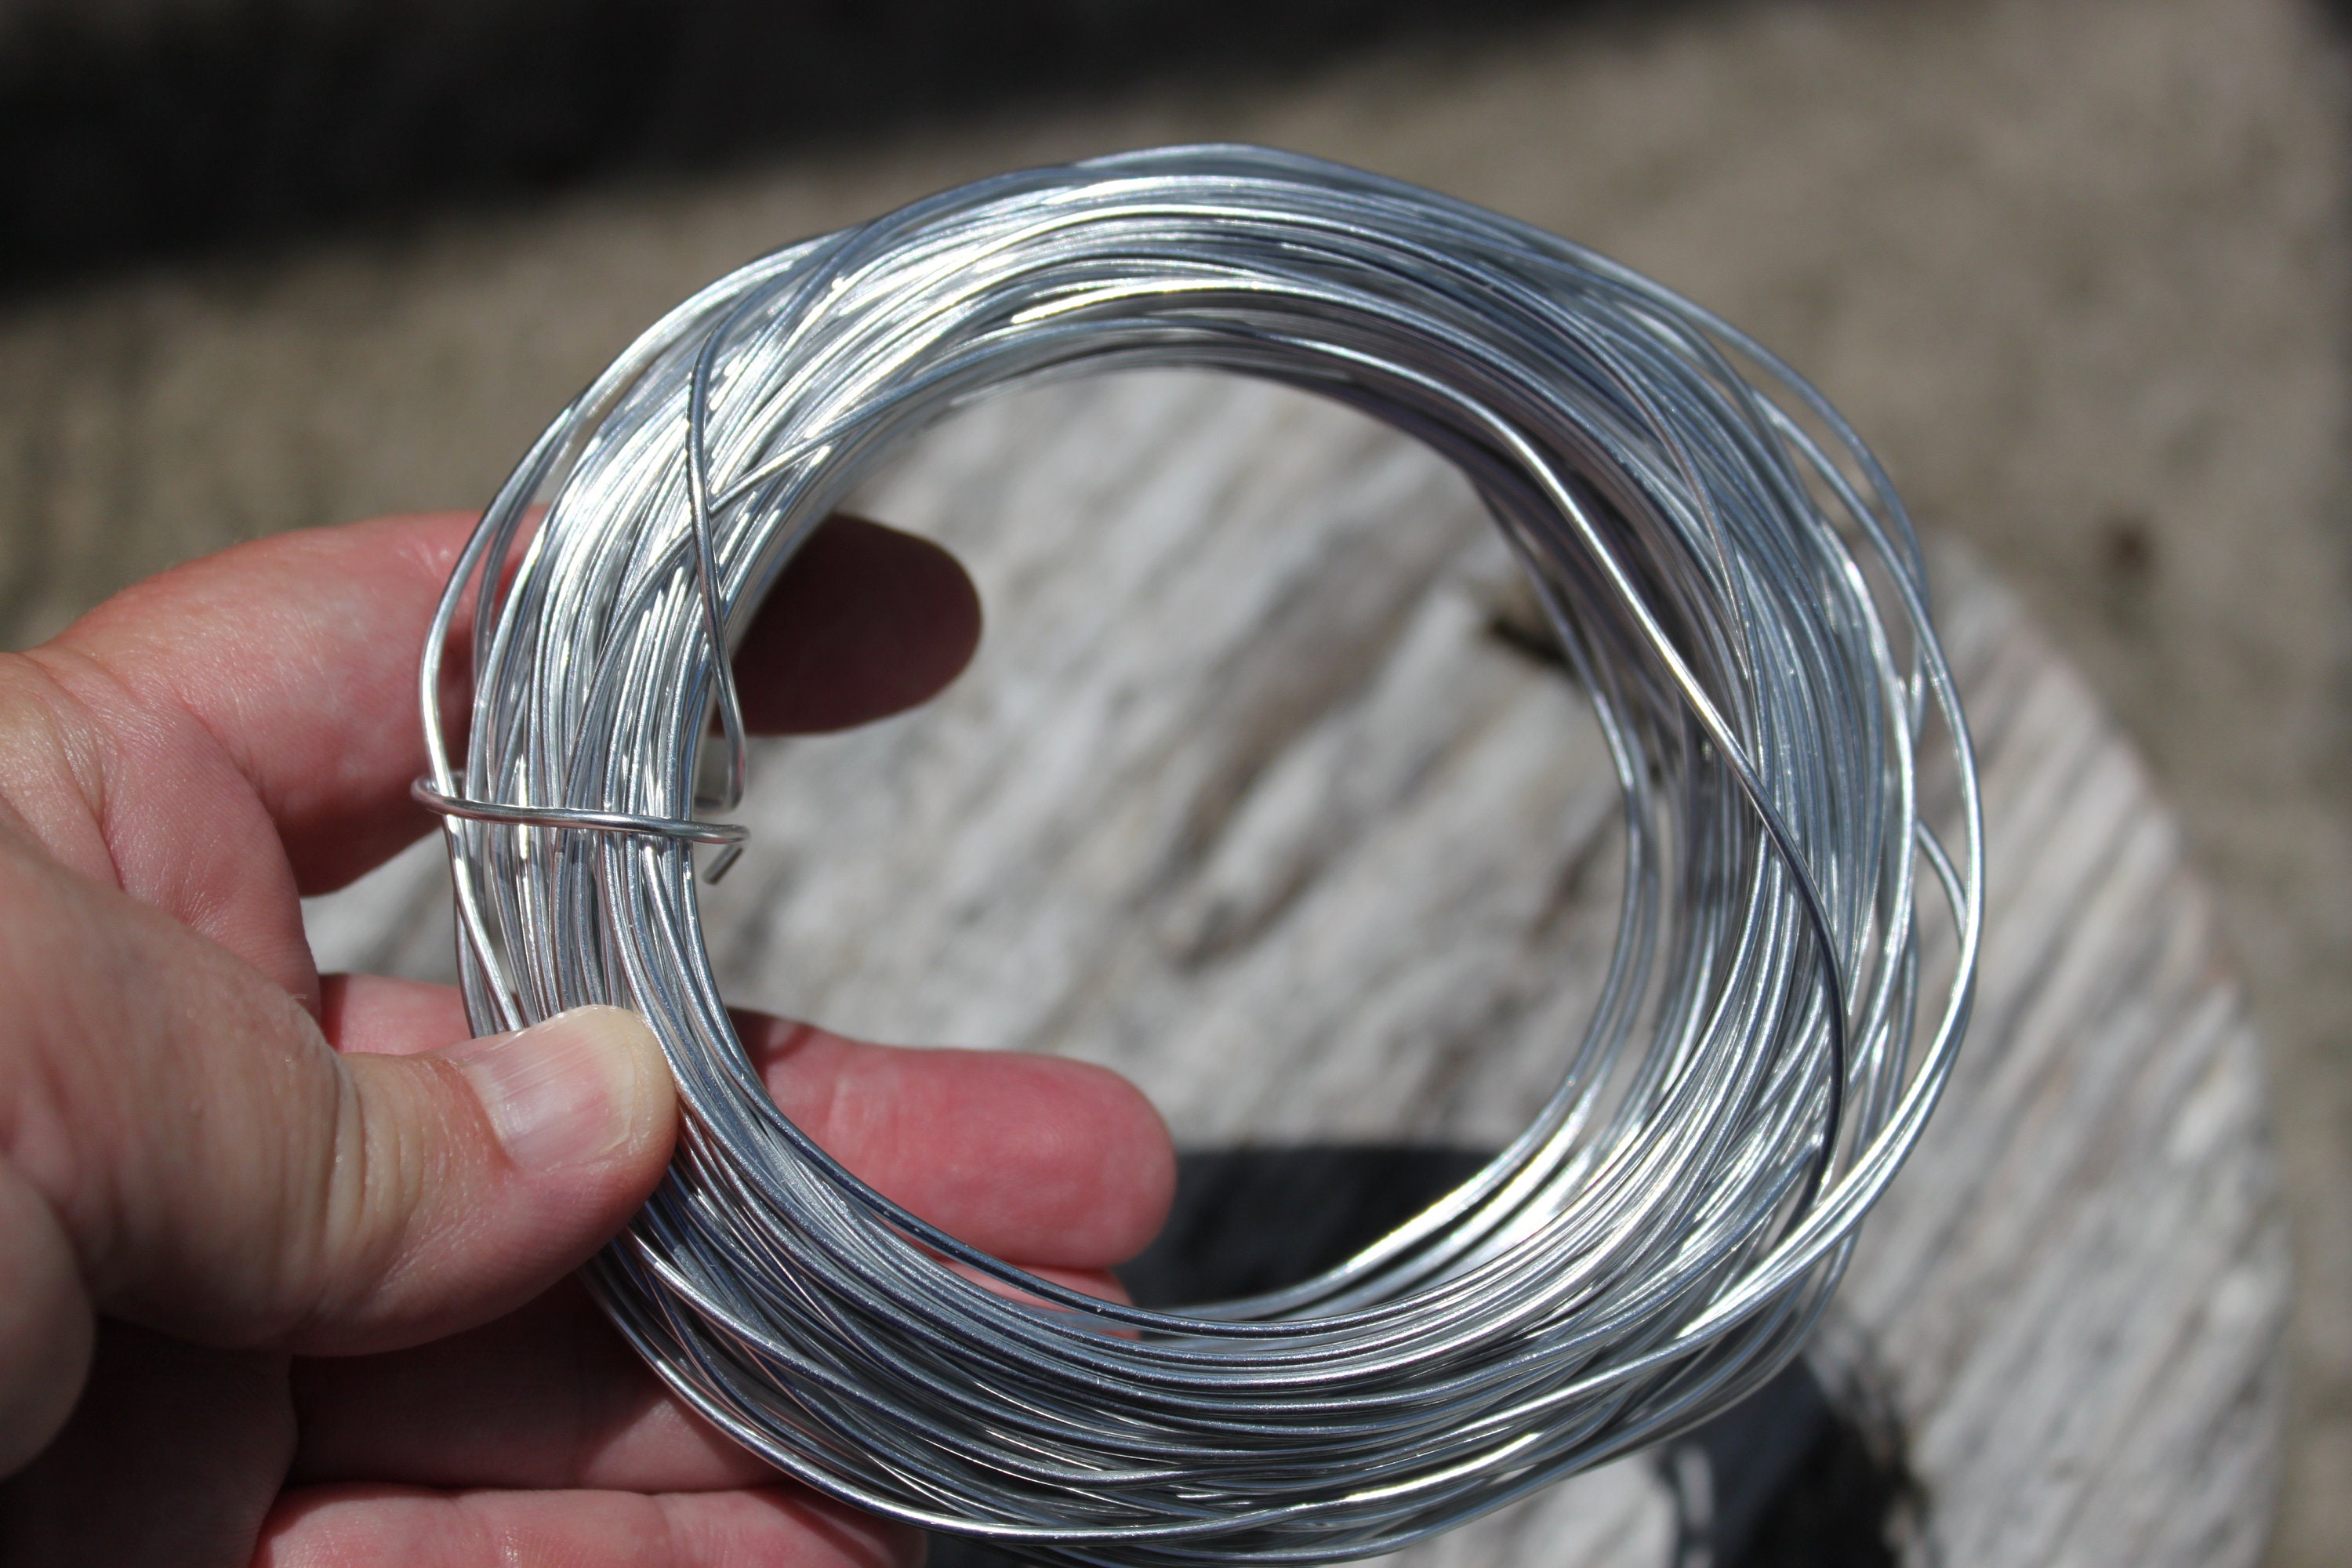 9 Gauge Bendable Metal Wire Armature Aluminum Craft Wire for Wreath Making  Beading Floral silver, 3 Mm Thickness by Fablise Craft 